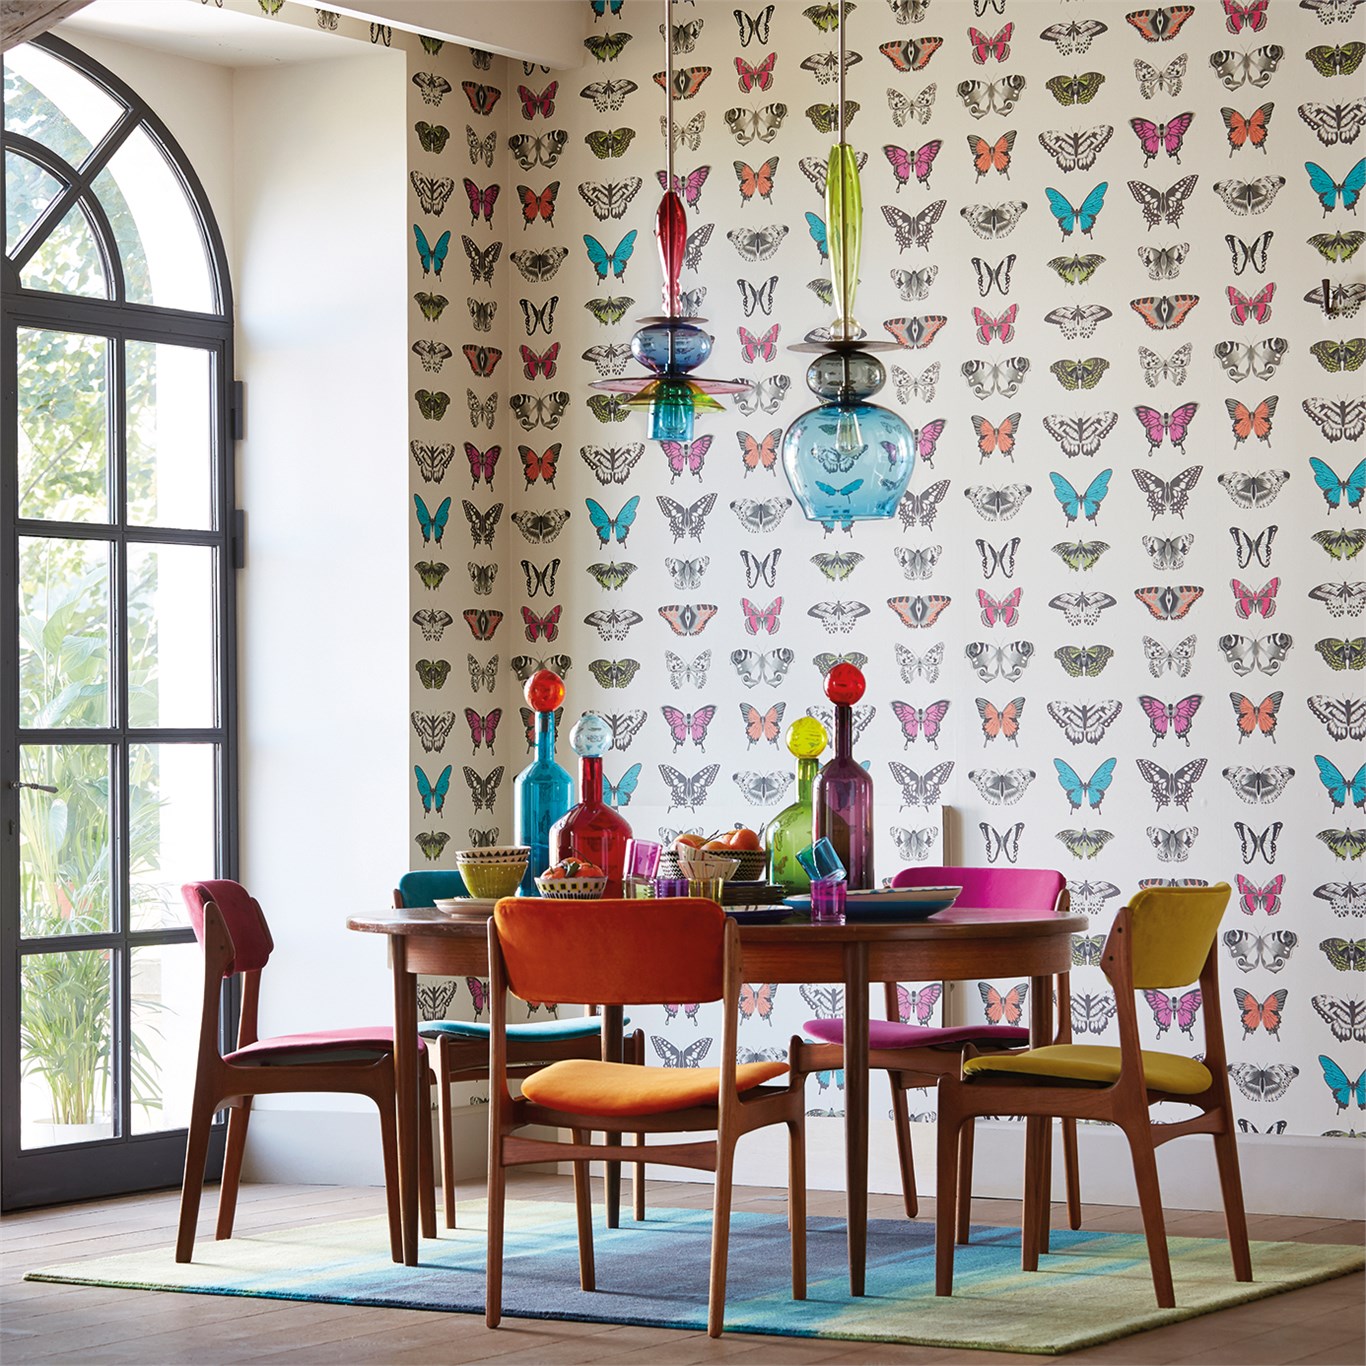 Papilio, A Wallpaper By Harlequin, Part Of The Amazilia - Small Room With High Ceiling - HD Wallpaper 